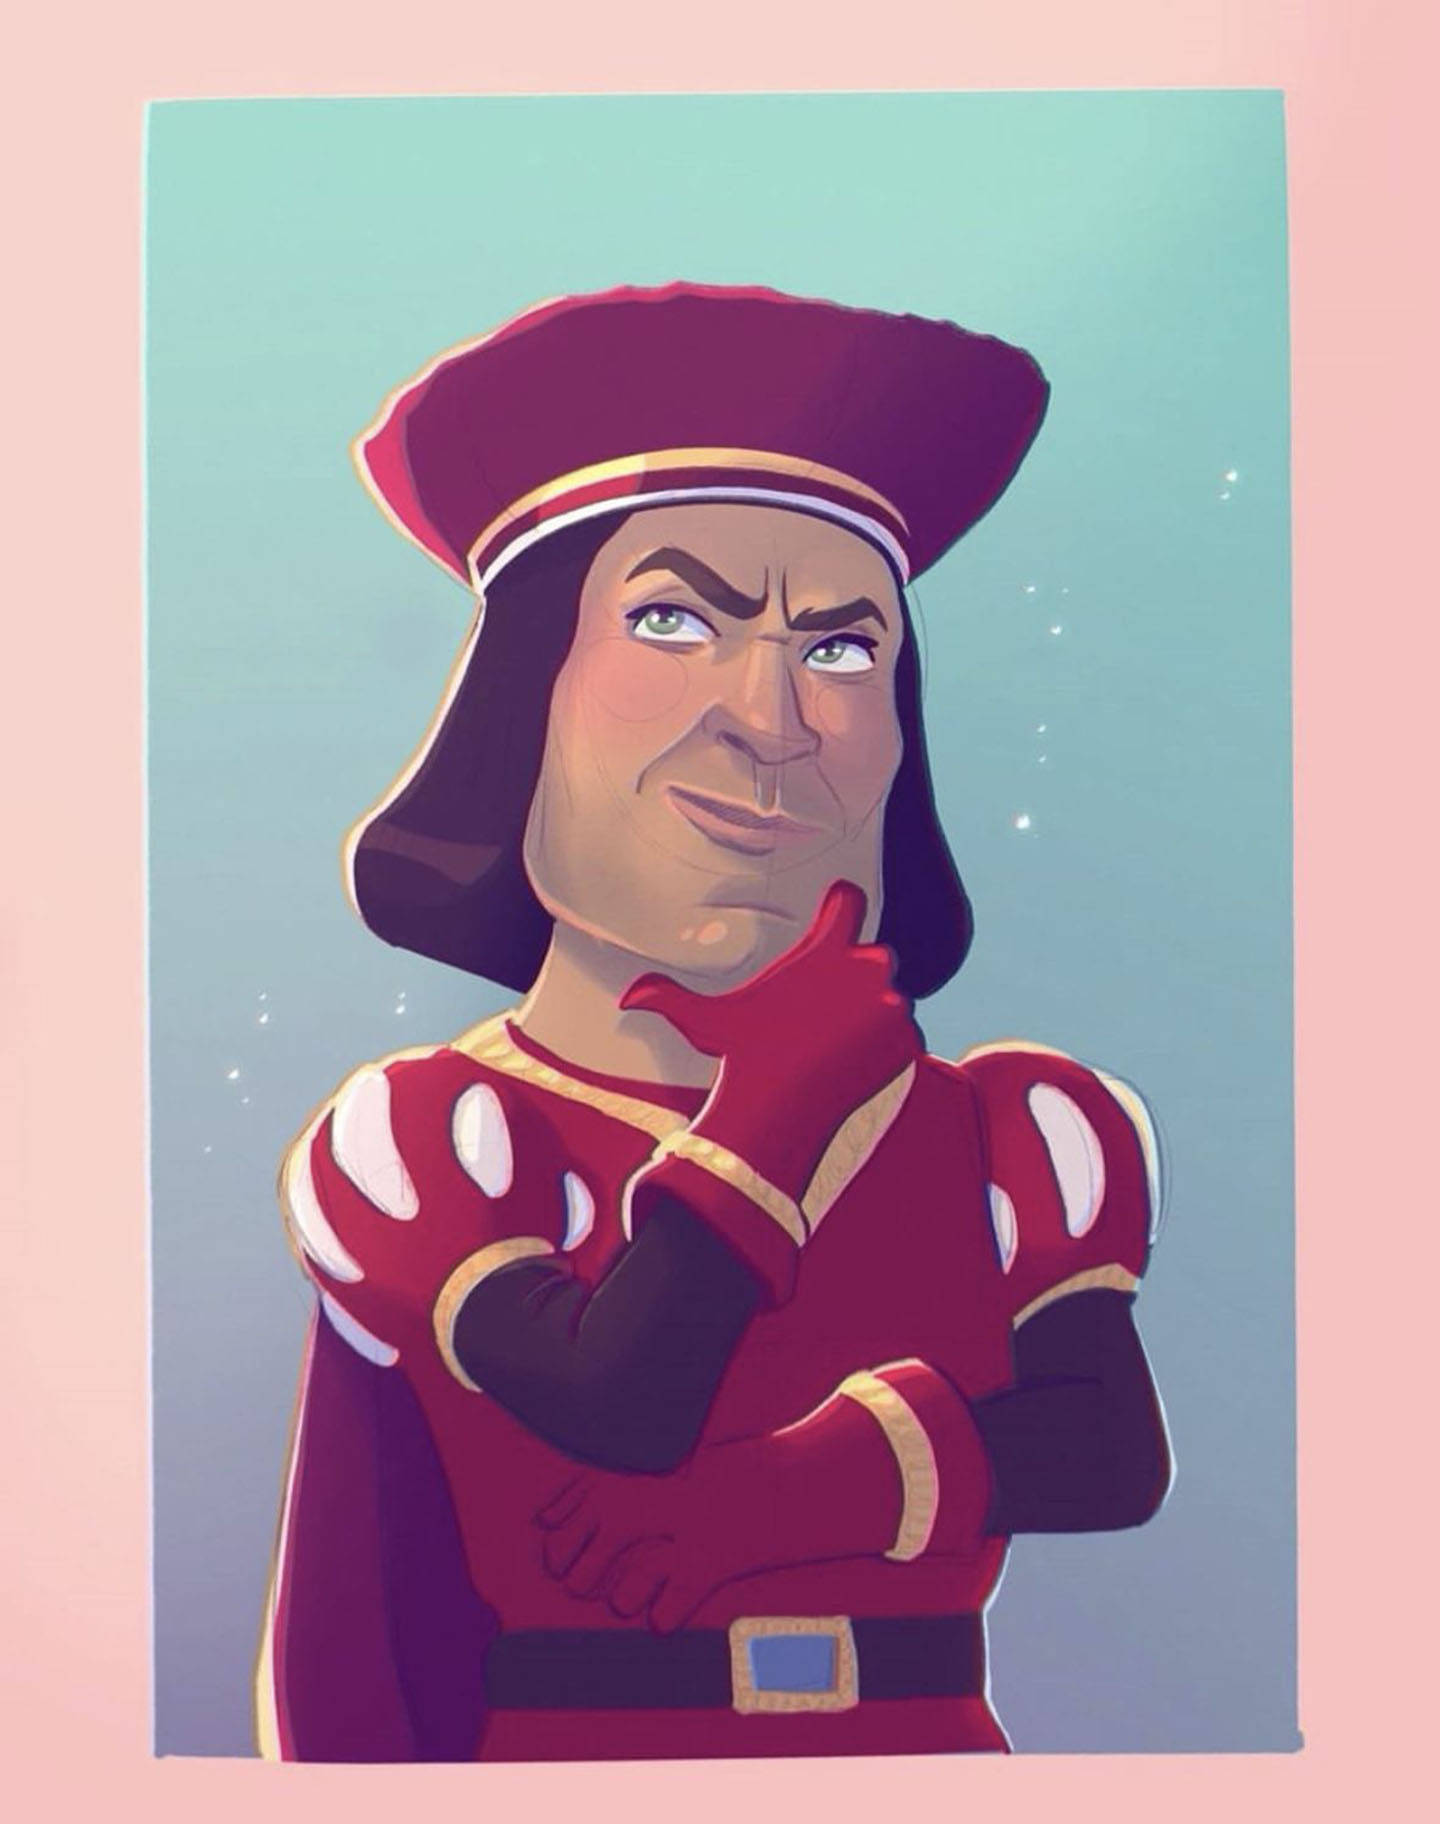 Top 999+ Lord Farquaad Wallpapers Full HD, 4K Free to Use